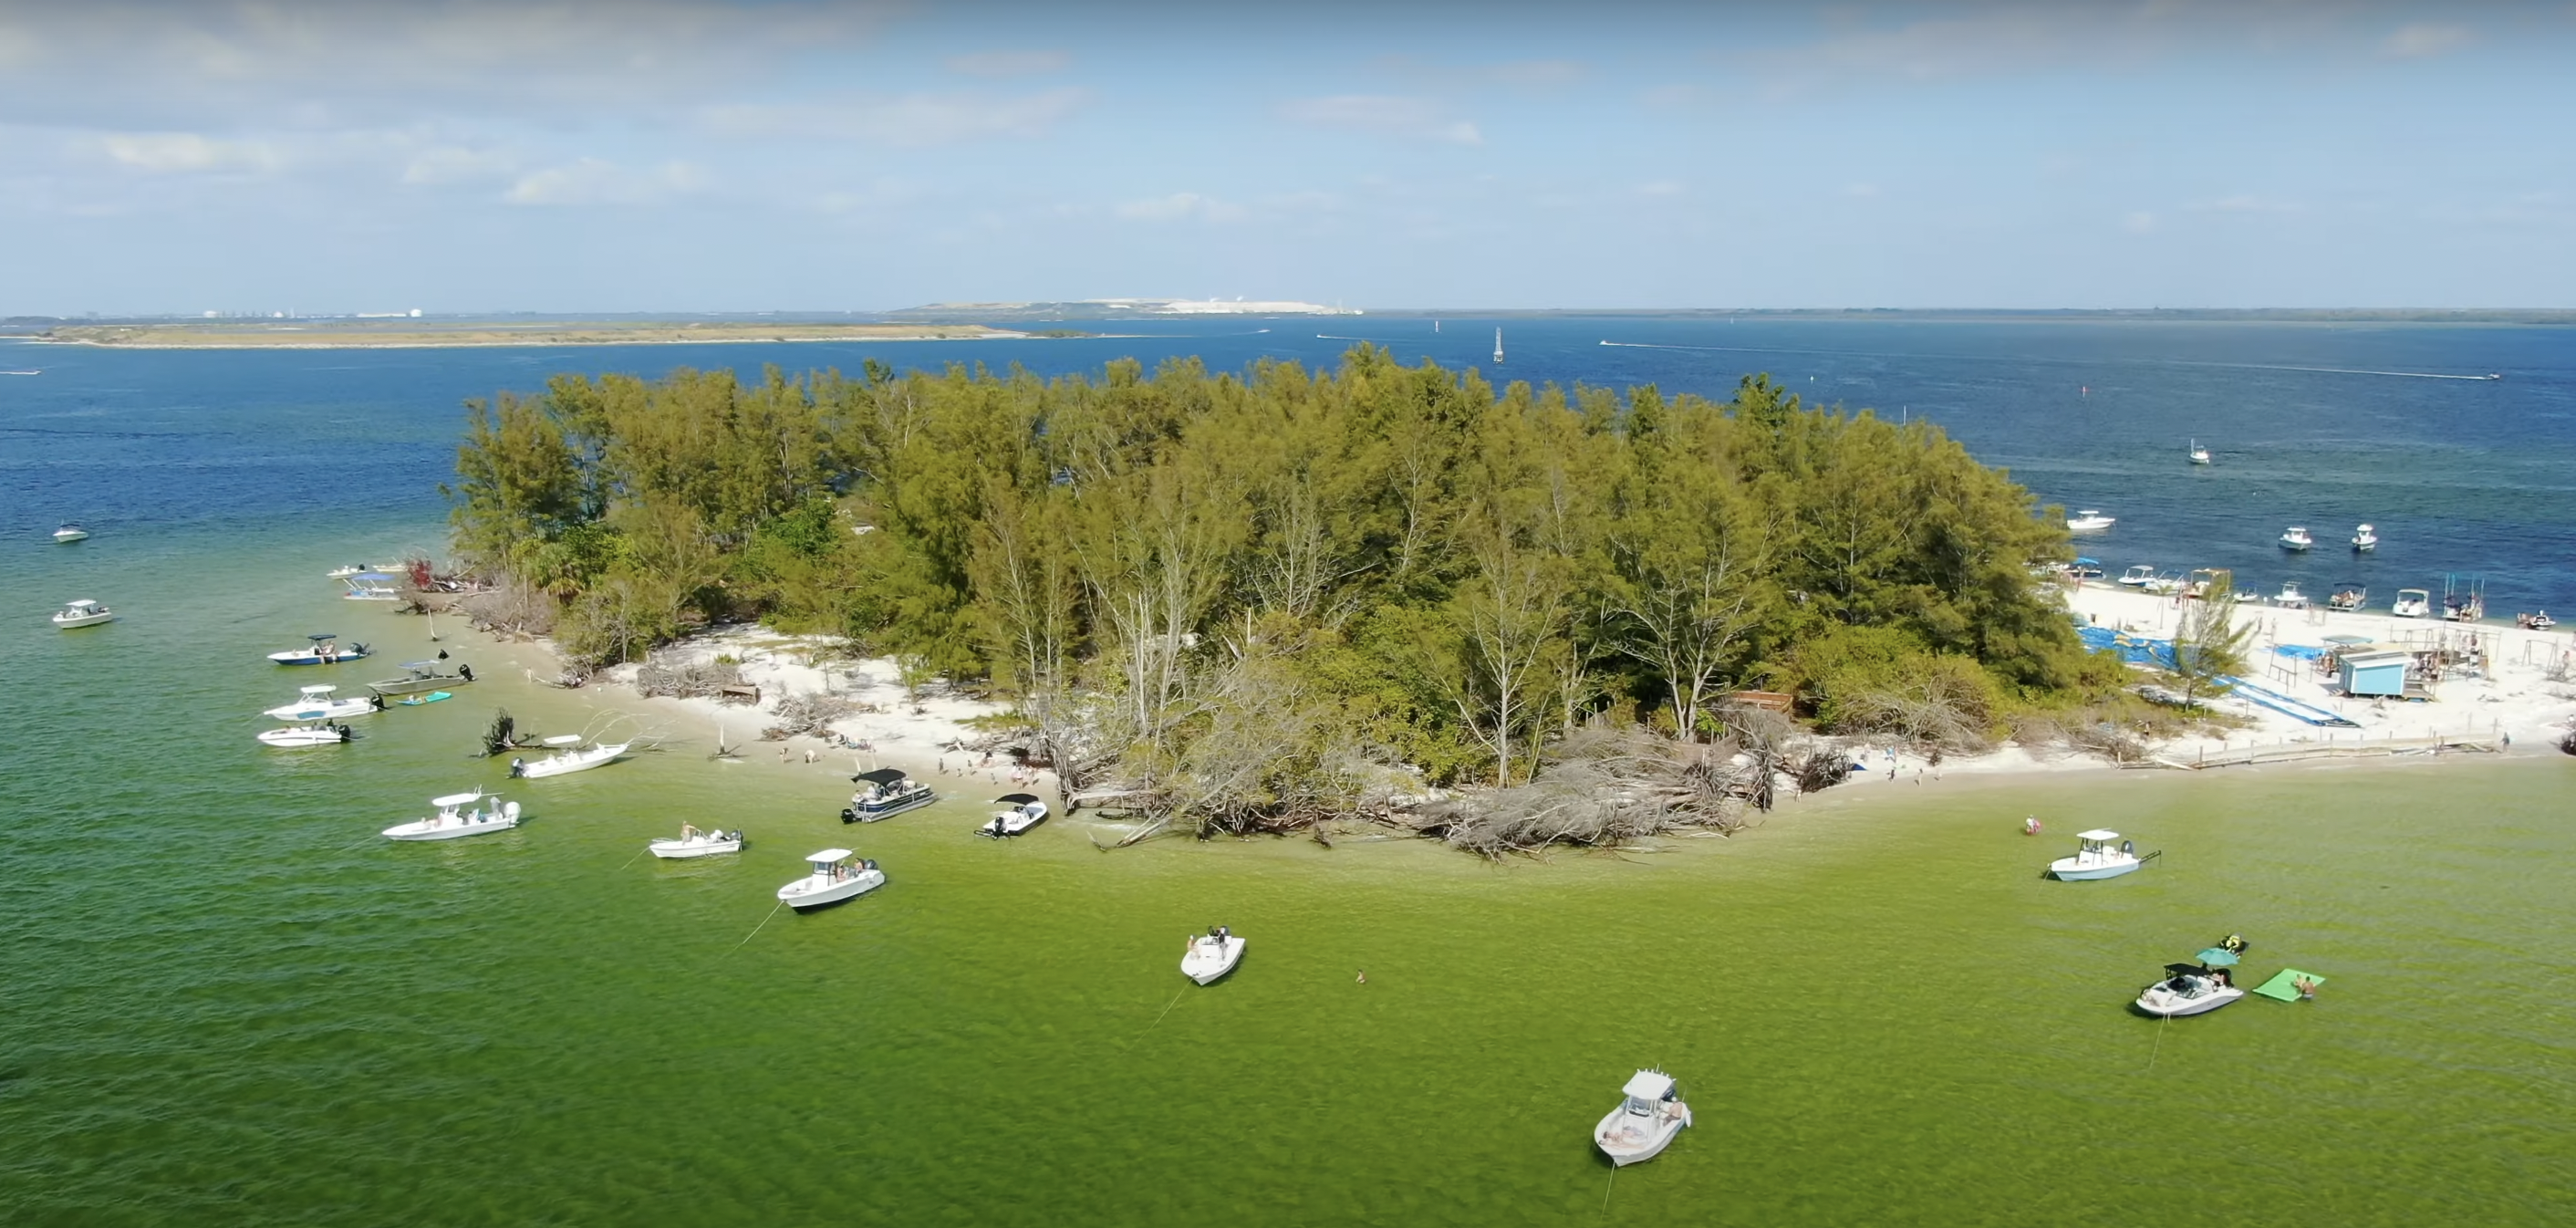 Four Friends Bought Deserted Florida Island For $65,000 And Turned It Into A Paradise Worth $14 Million